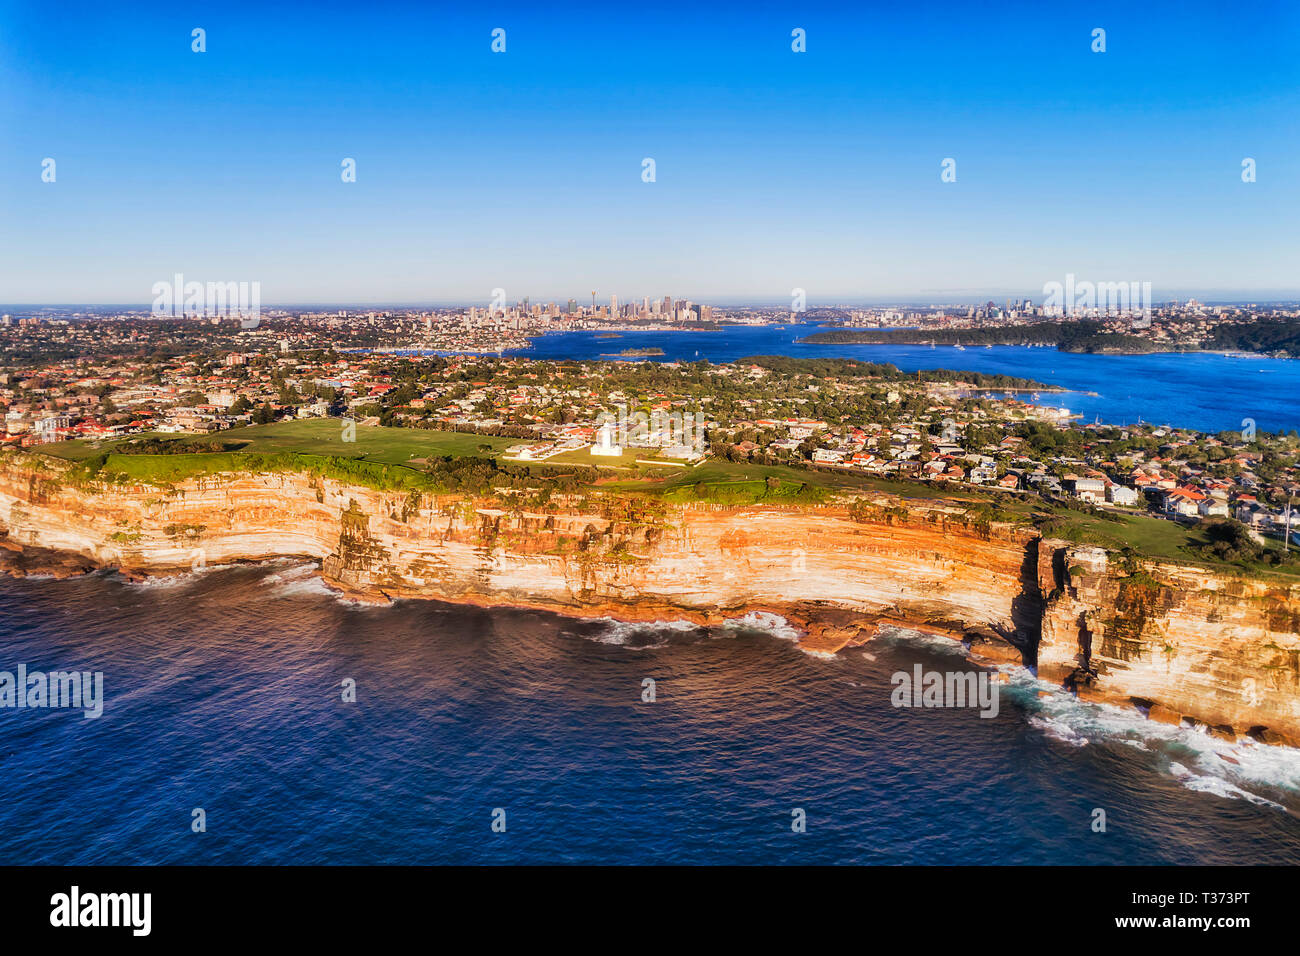 Sandstone cliff edge of Sydney Eastern suburbs facing Pacific ocean in aerial view over distant Harbour and city CBD on horizon. Stock Photo